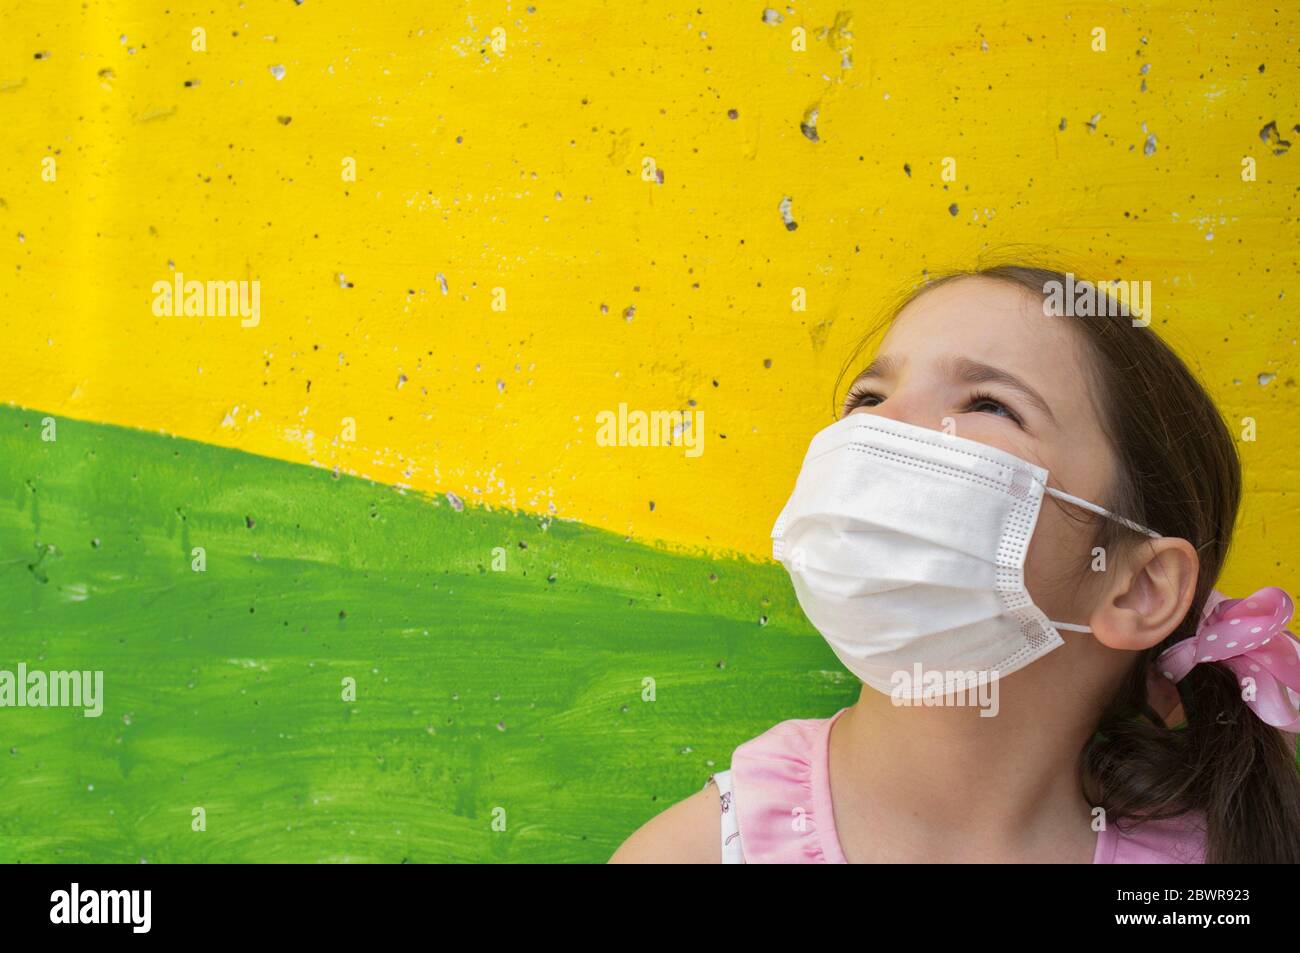 Hopeful little girl wears face mask during Covid-19 pandemic. Lively colored concrete block as background. Stock Photo